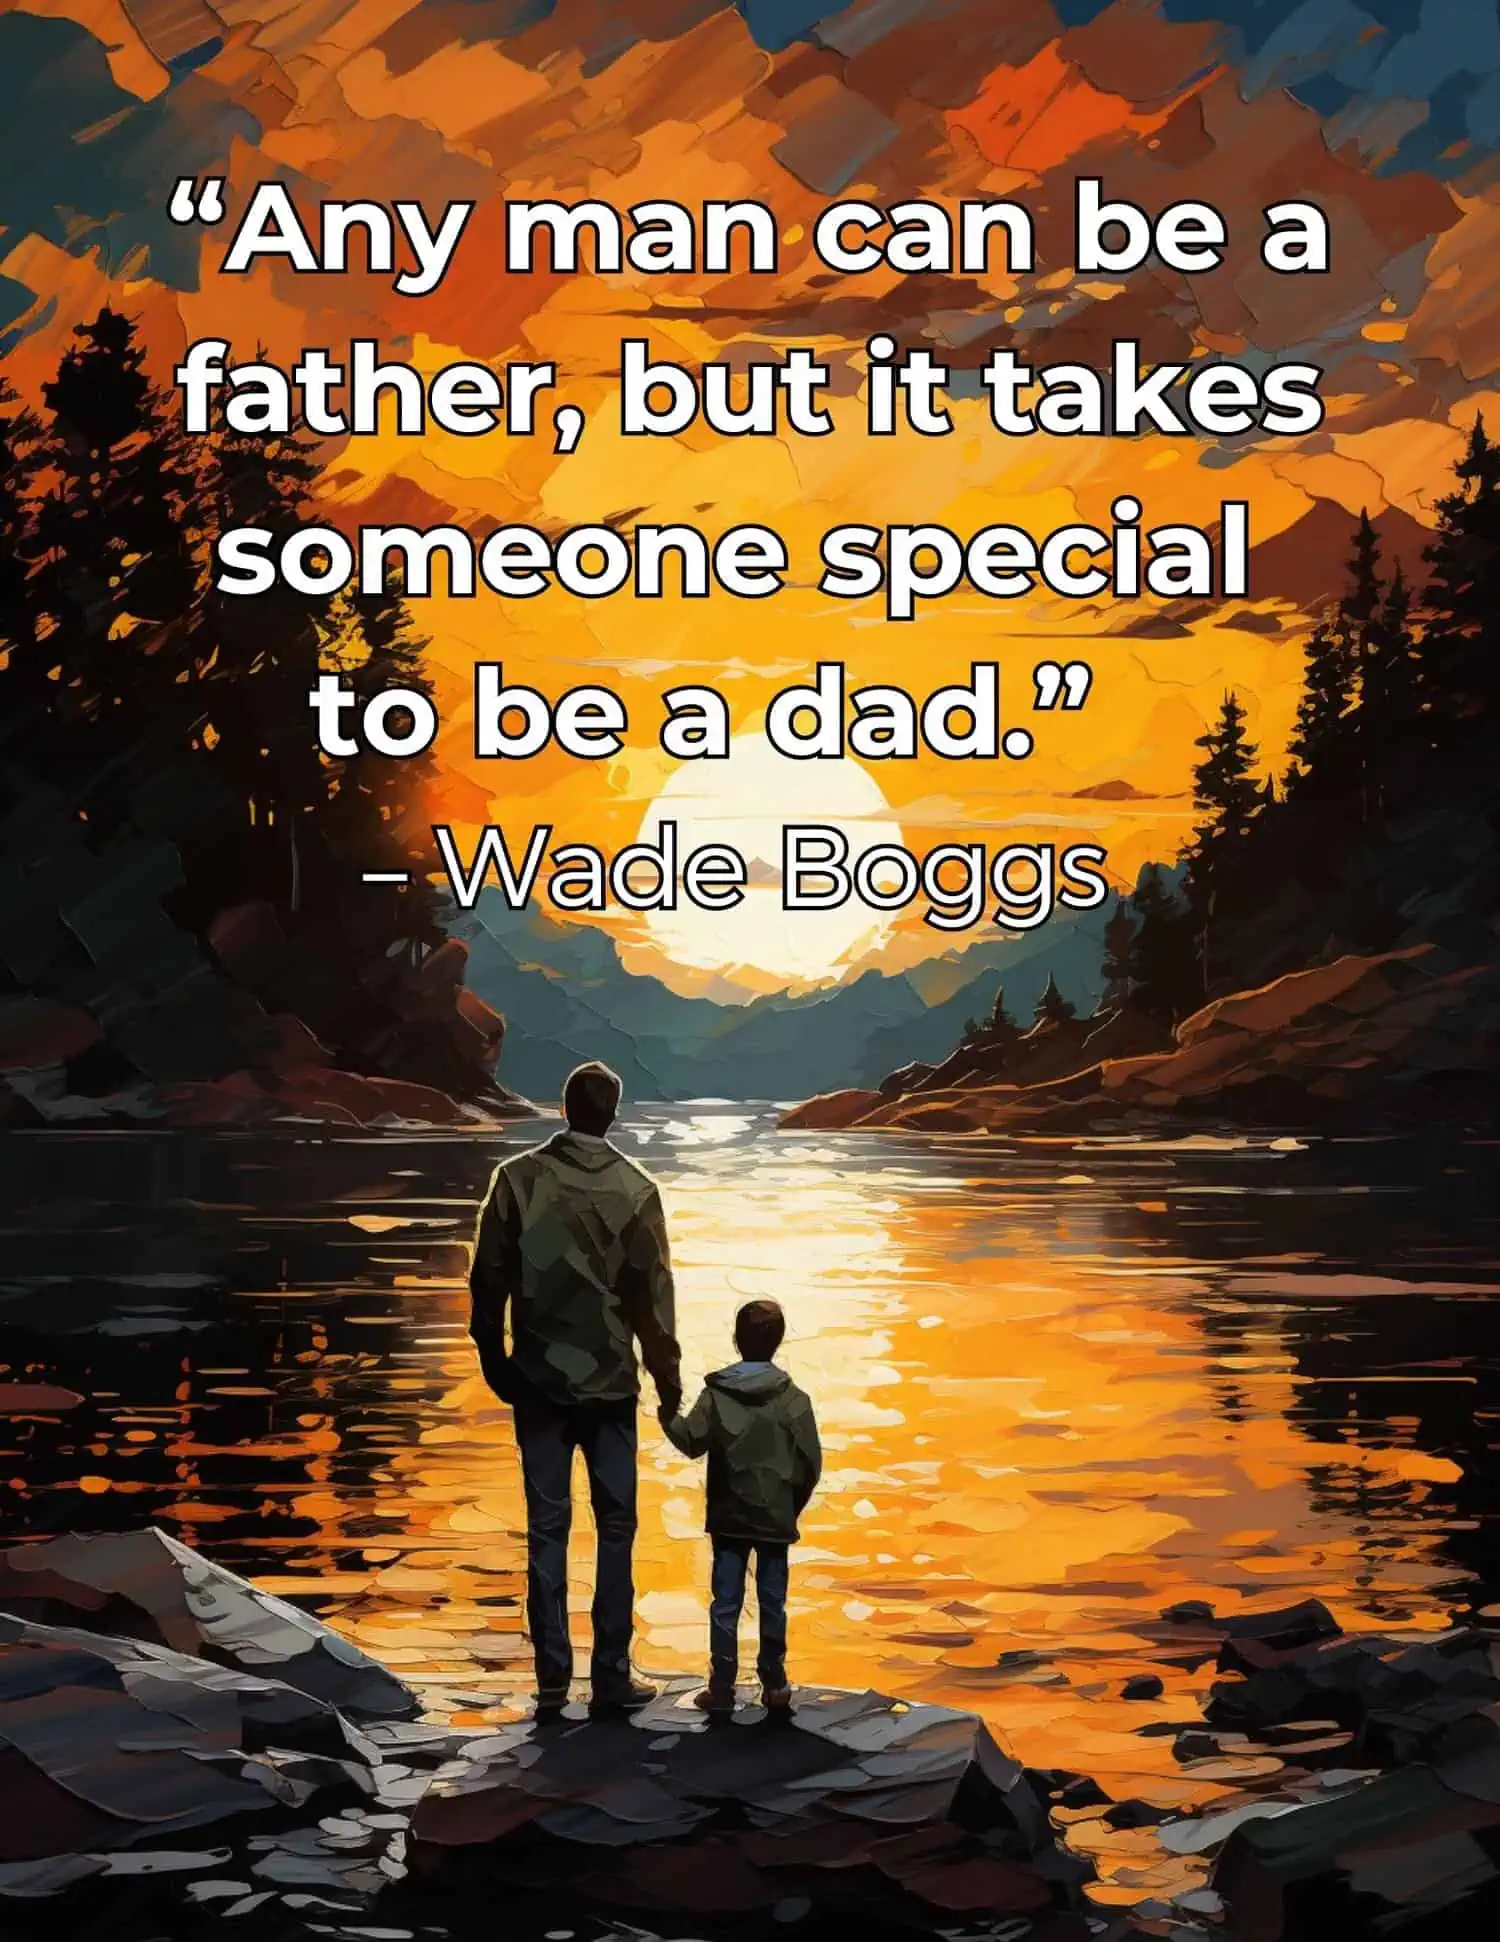 A curated collection of inspiring and heartfelt quotes to celebrate your dad's special day.